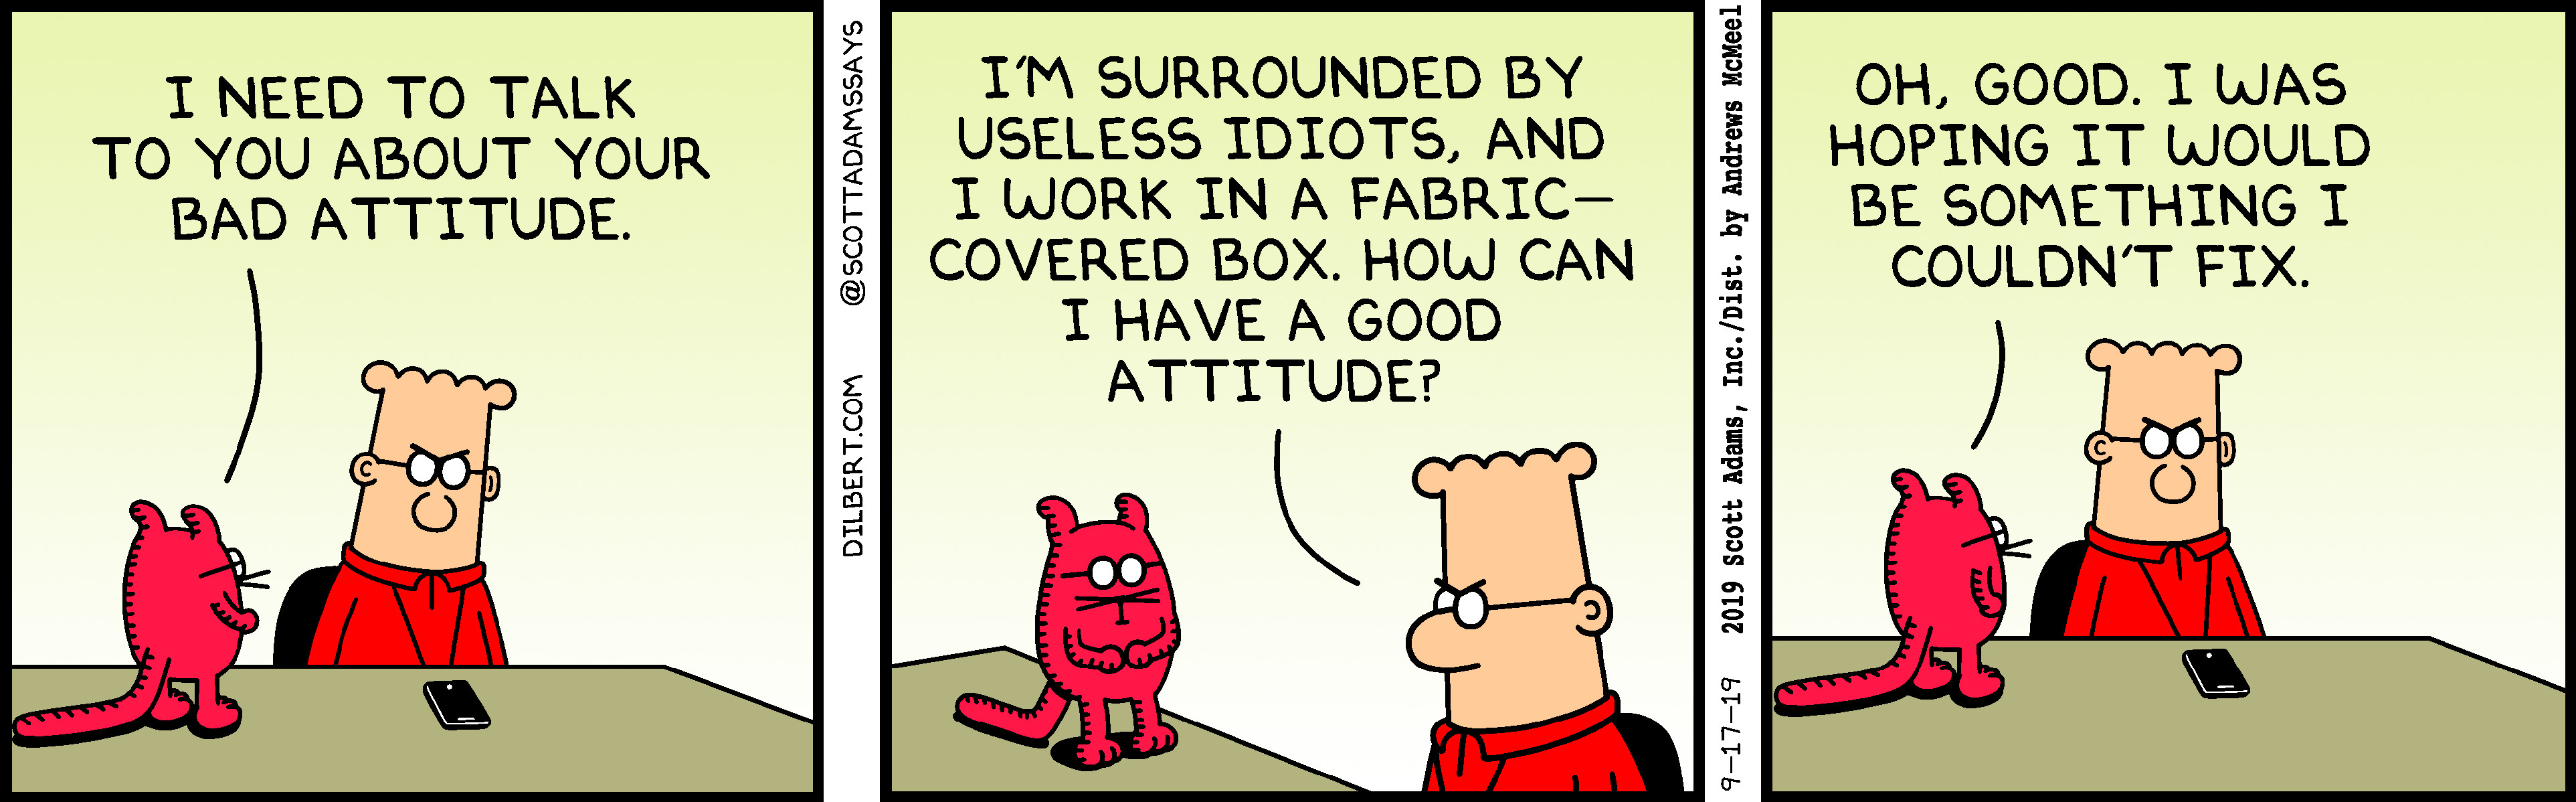 dilbert-comic-strips-every-day-electronics-weekly